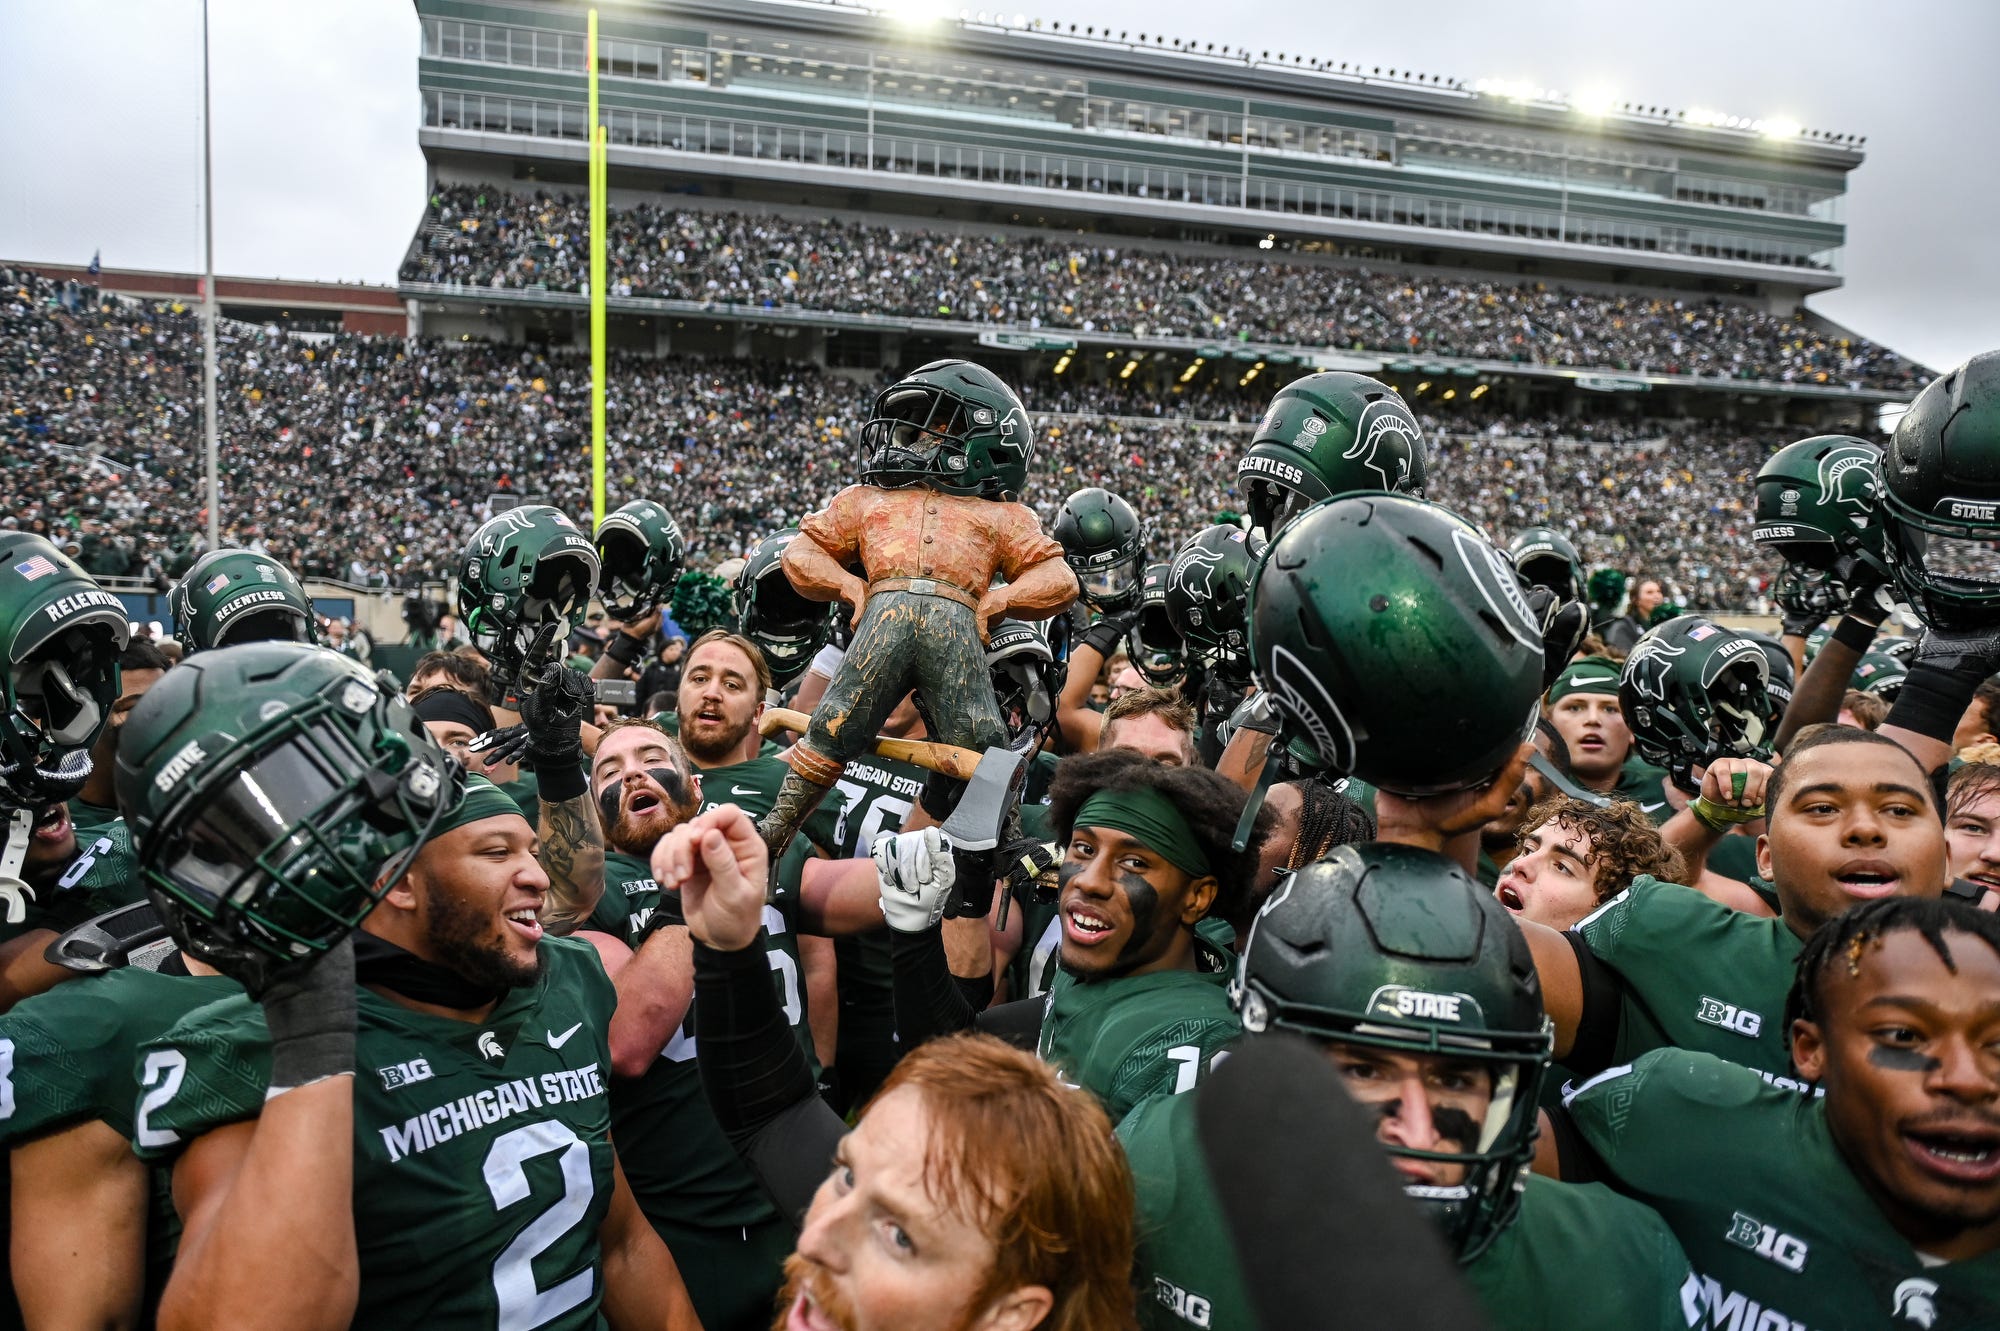 Michigan State celebrates with Paul Bunyan trophy after beating in-state rival Michigan 37 - 33